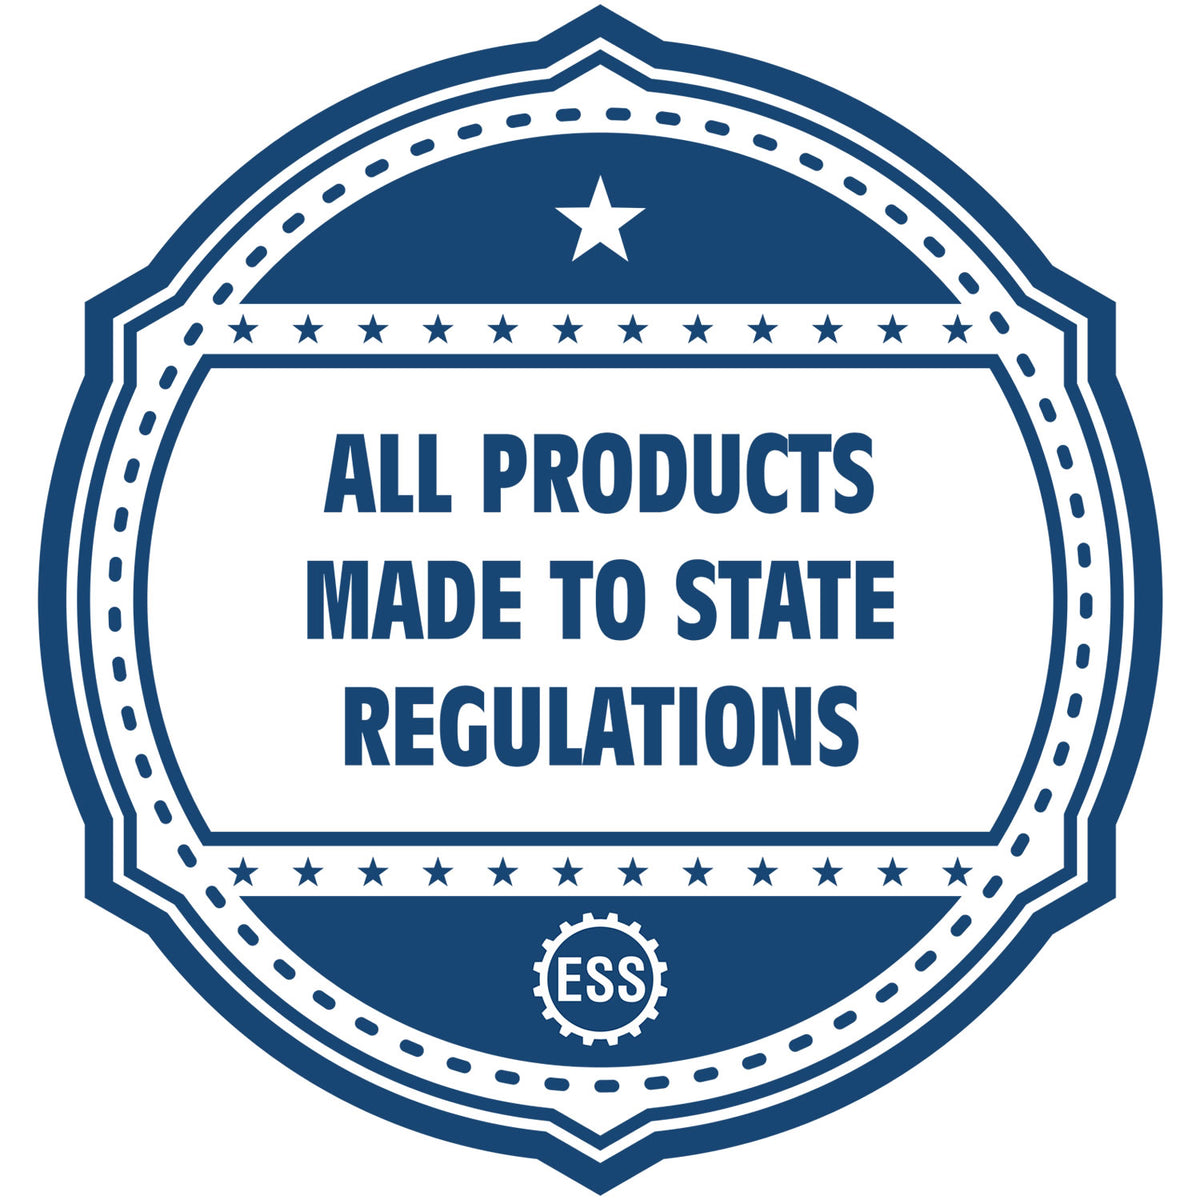 A blue icon or badge for the Soft Utah Professional Geologist Seal showing that this product is made in compliance with state regulations.